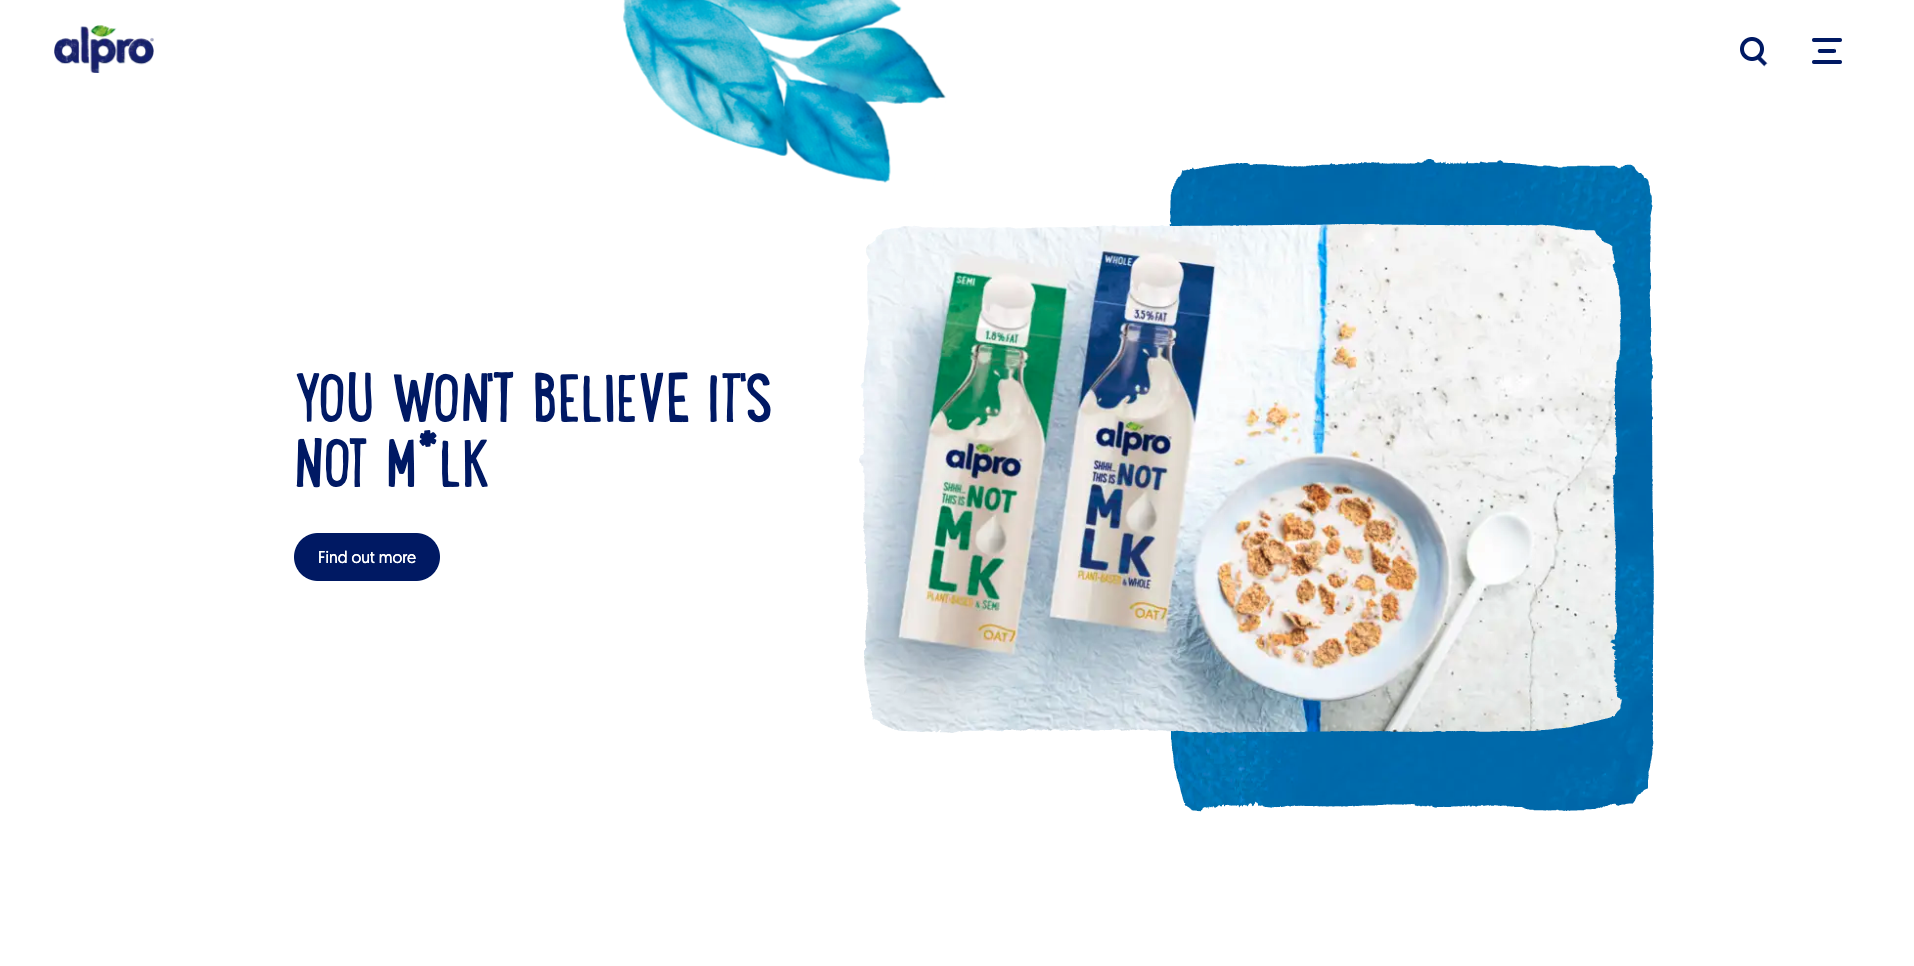 alpro - tasty plant-based food and drink products